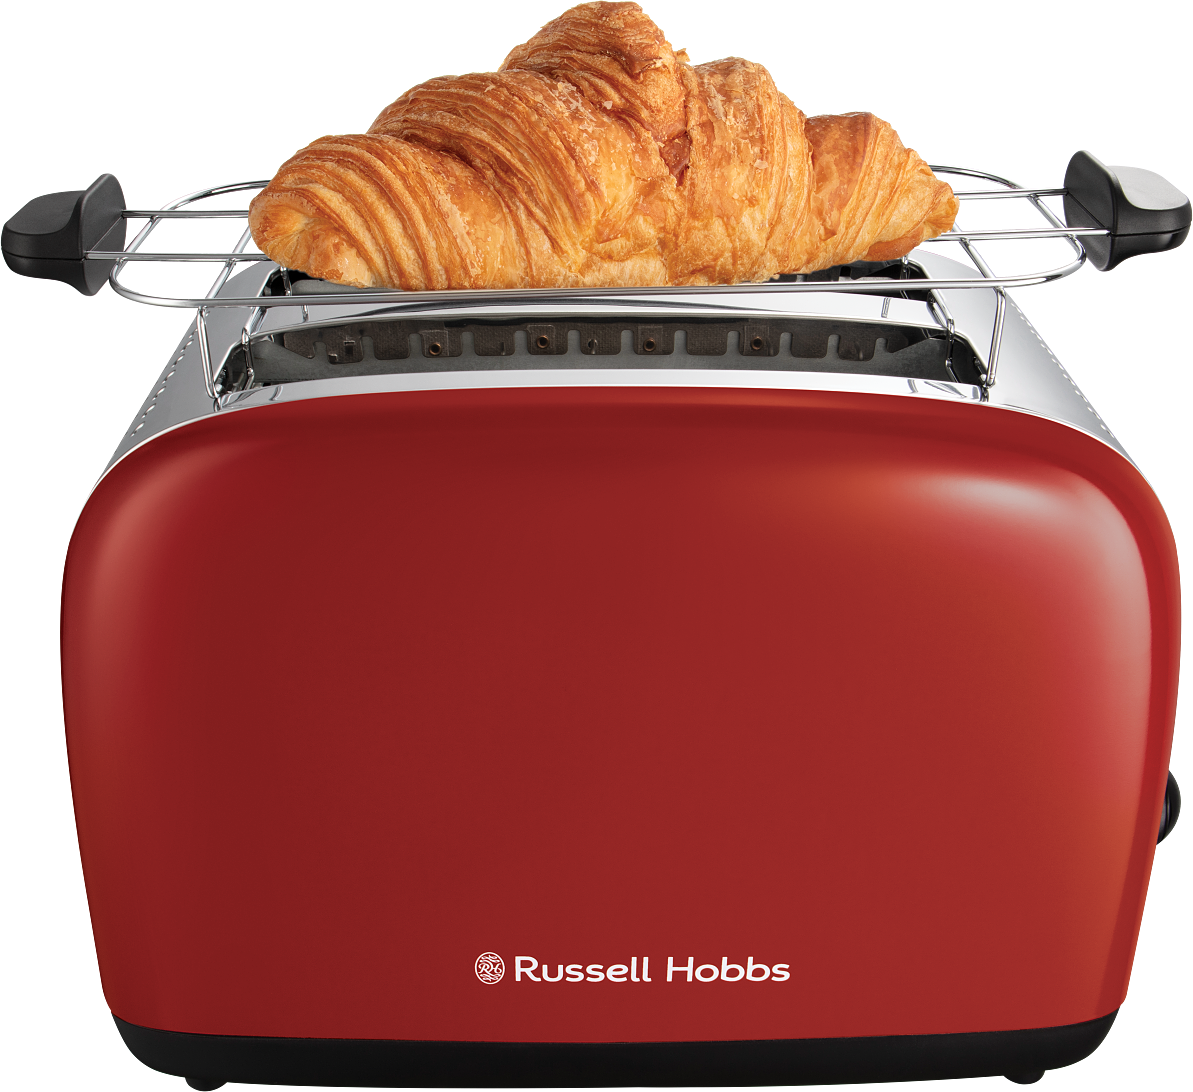 Russell Hobbs_Colours Plus Toaster_Flame Red_59,99 Euro (5)